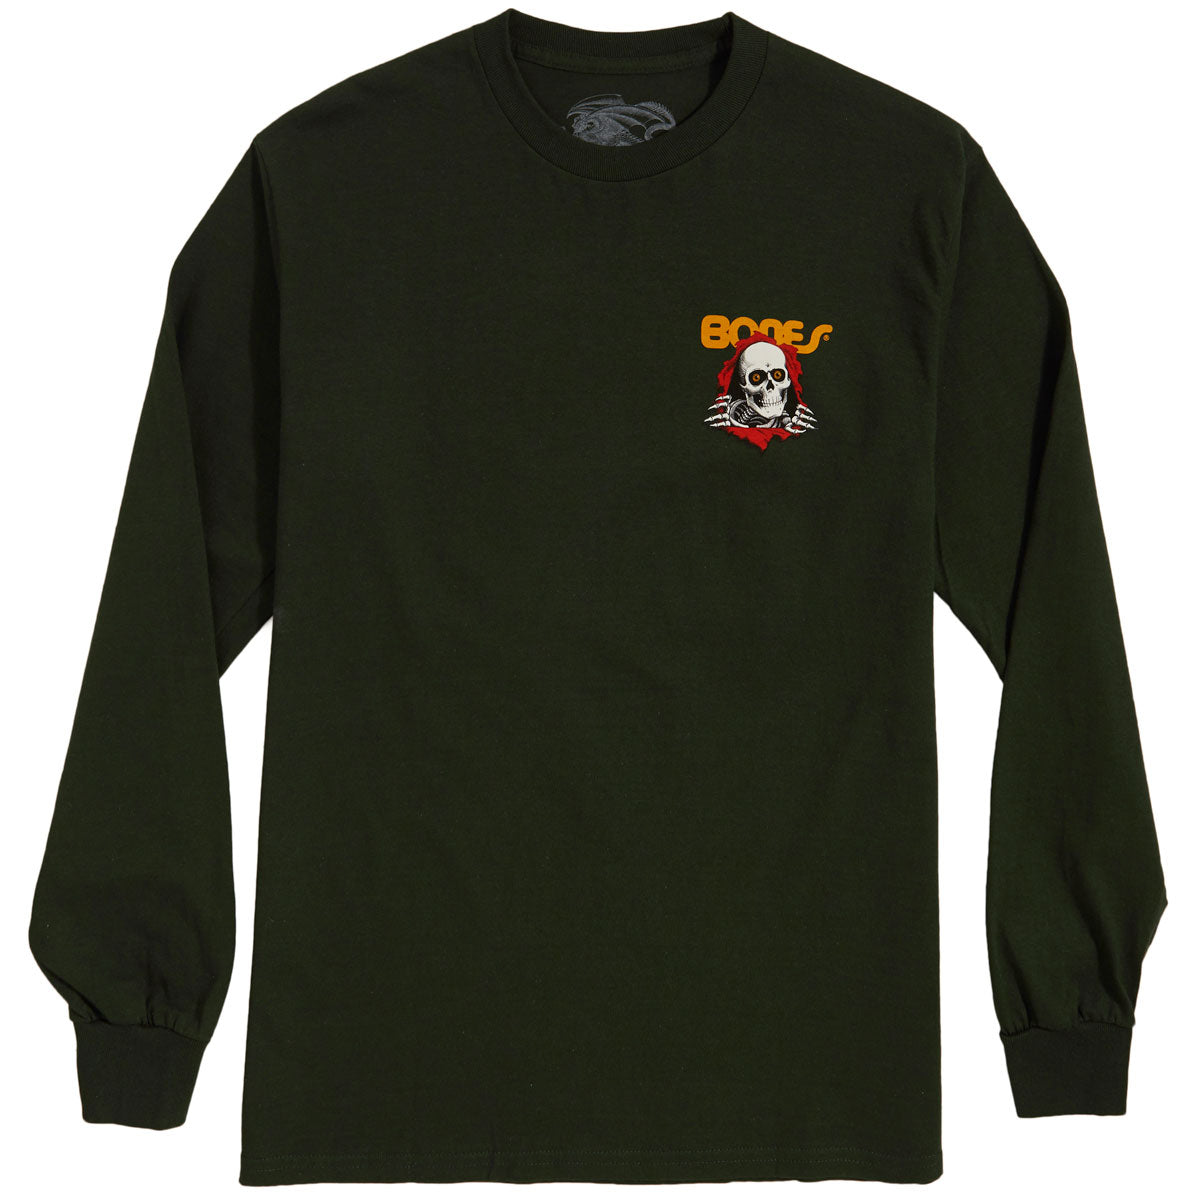 Powell-Peralta Ripper Long Sleeve T-Shirt - Forest Green image 1